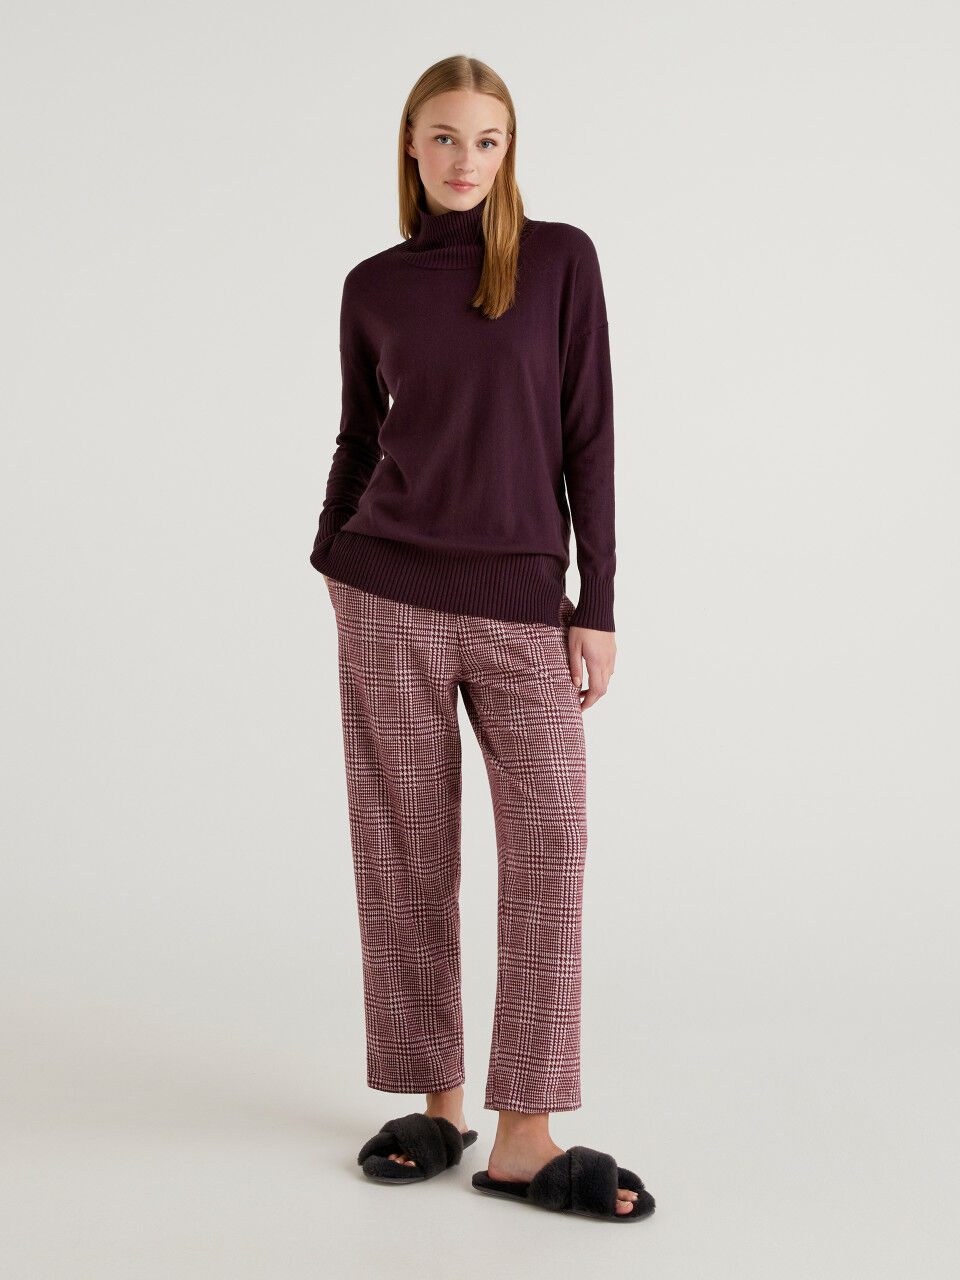 Prince of Wales jacquard trousers